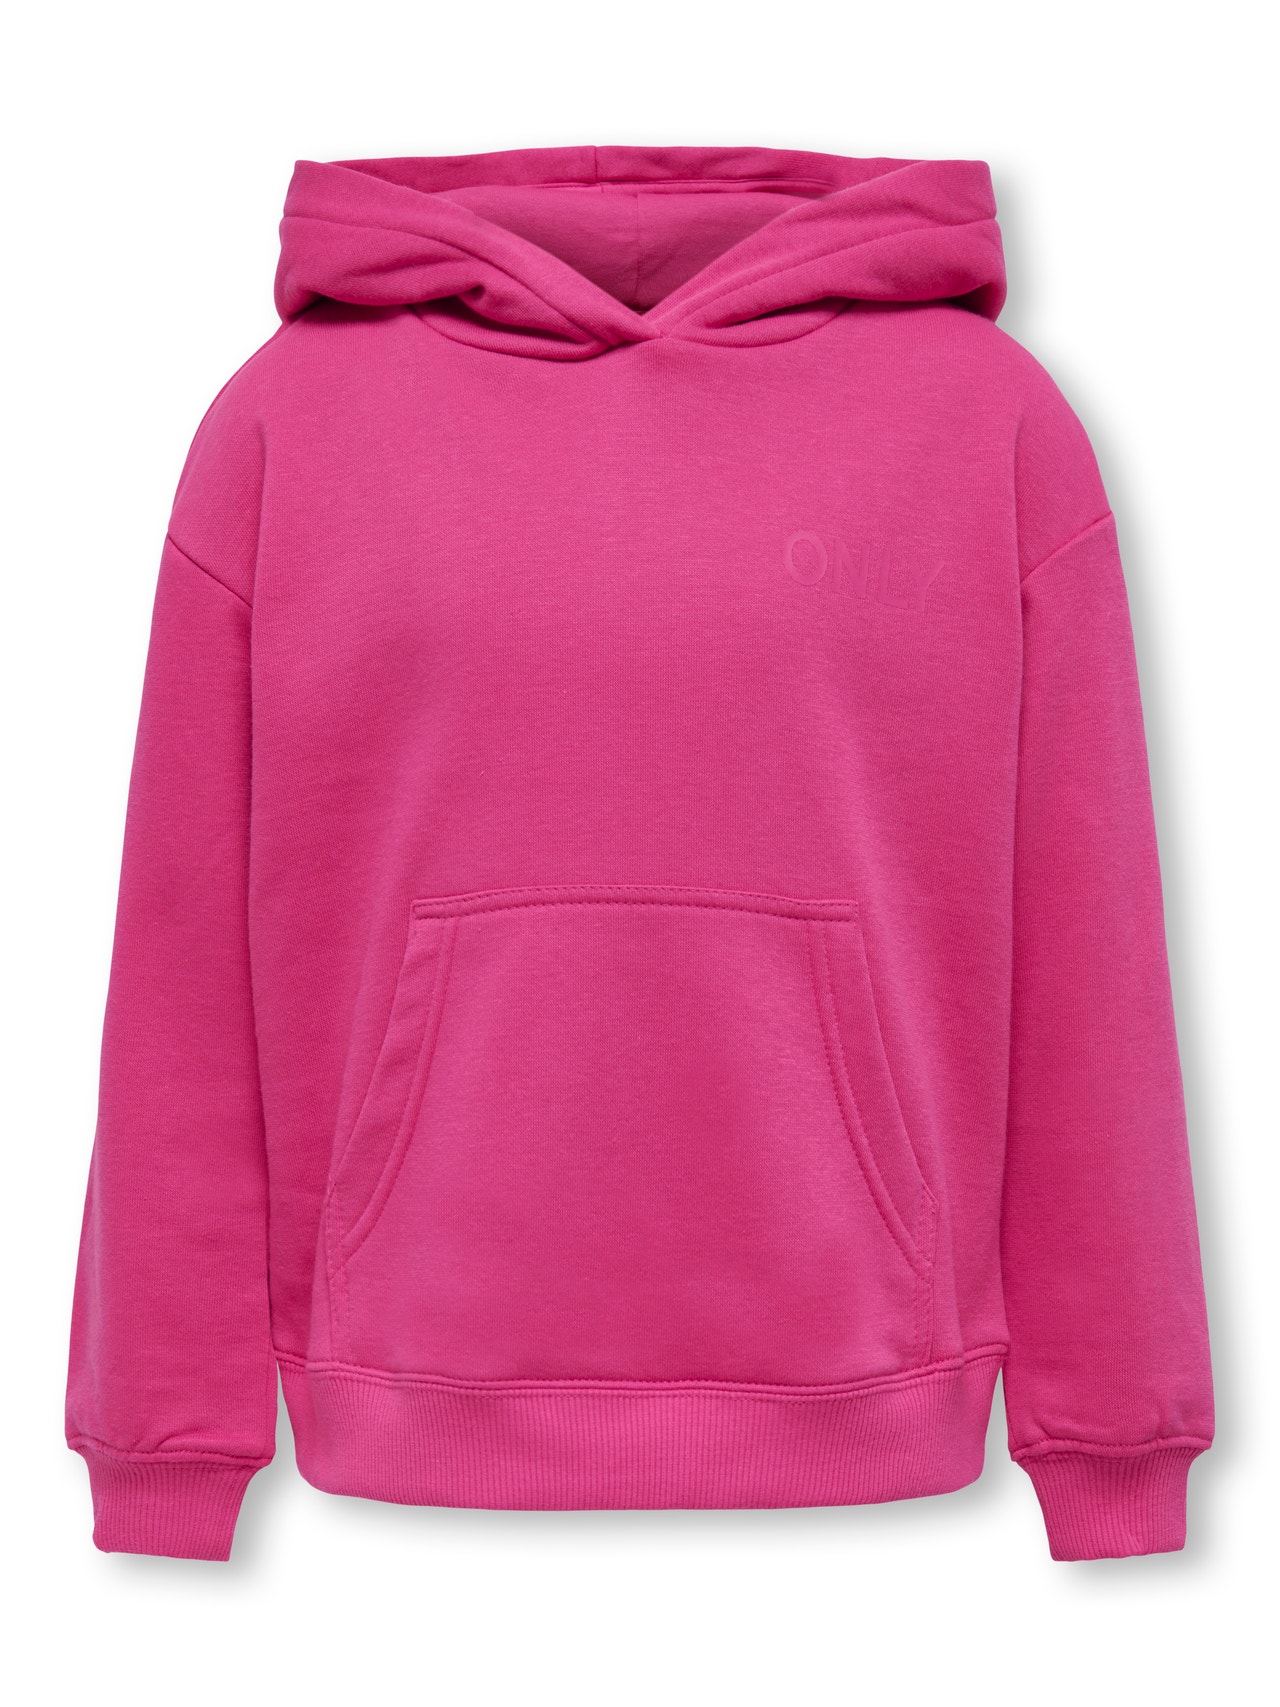 ONLY Loose Fit Round Neck Sweatshirts -Fuchsia Rose - 15247208